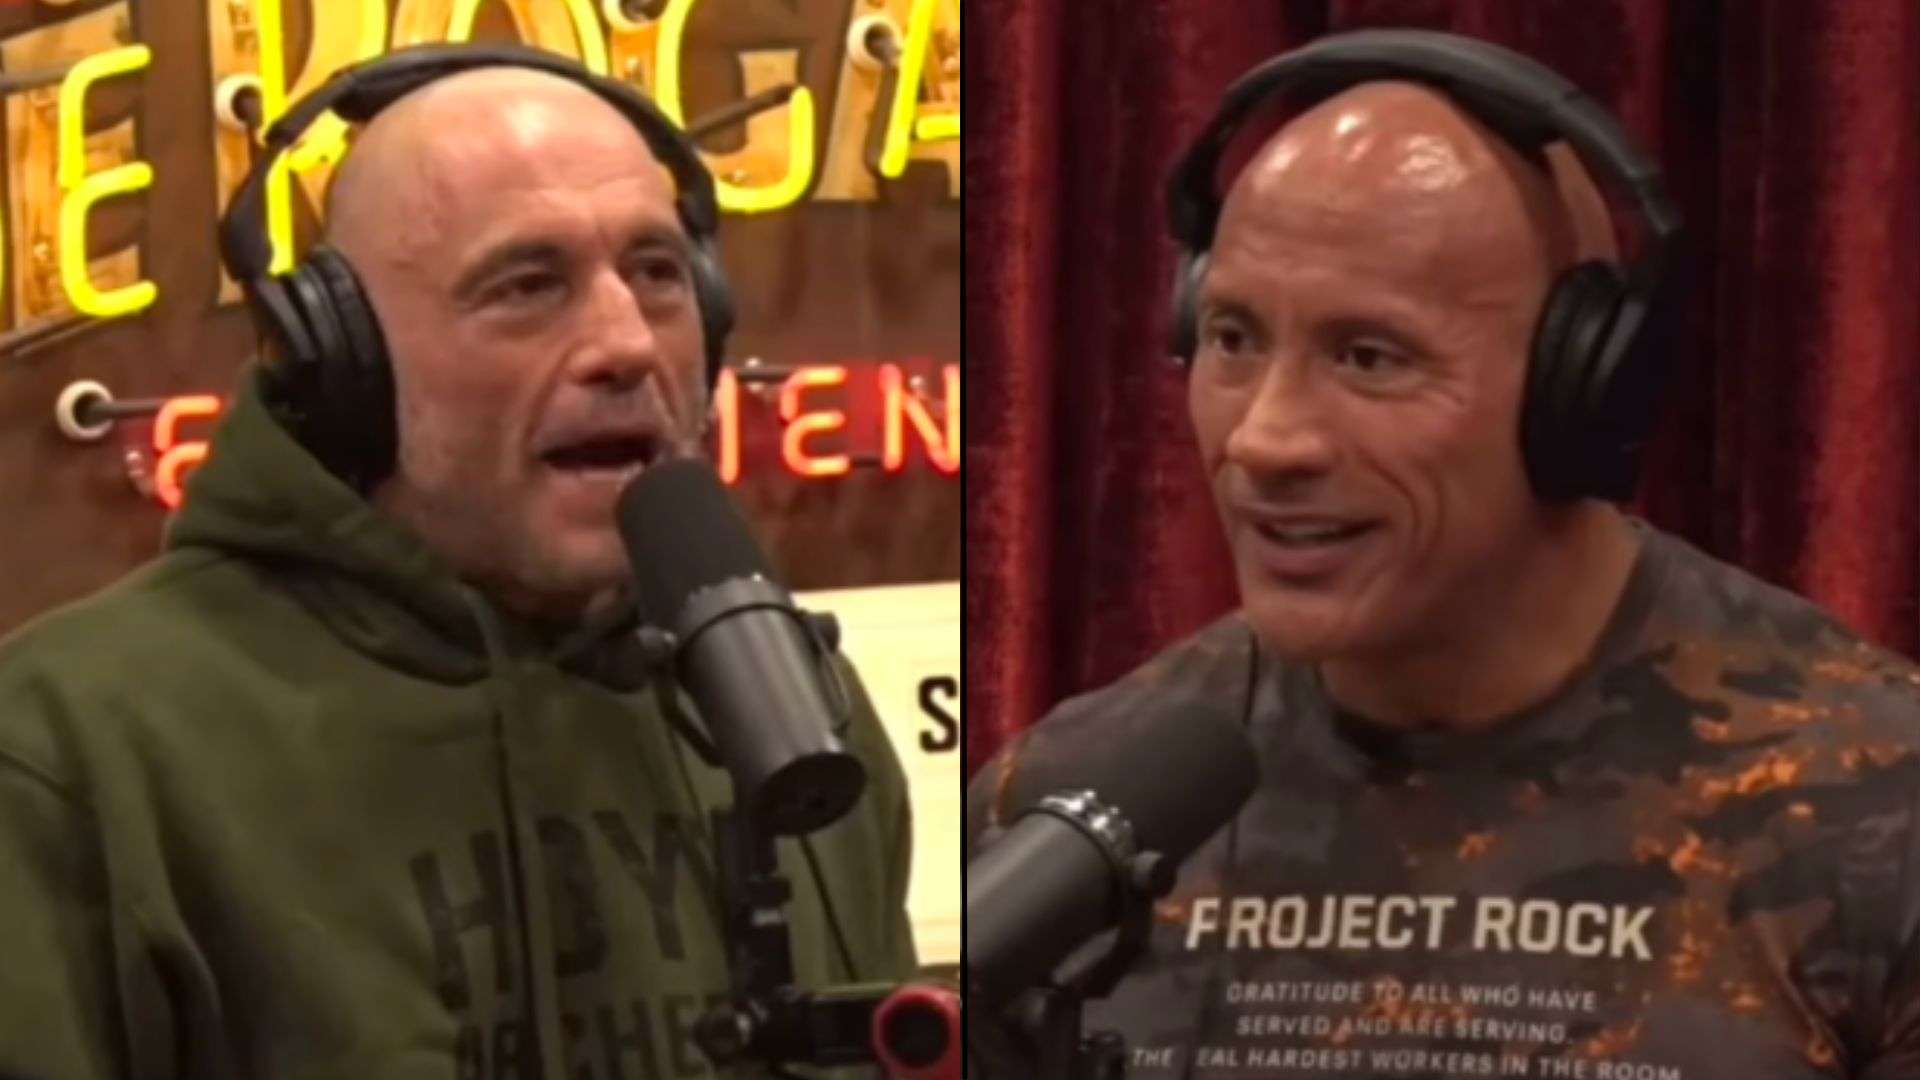 Joe Rogan and The Rock sat opposite each other recording podcast